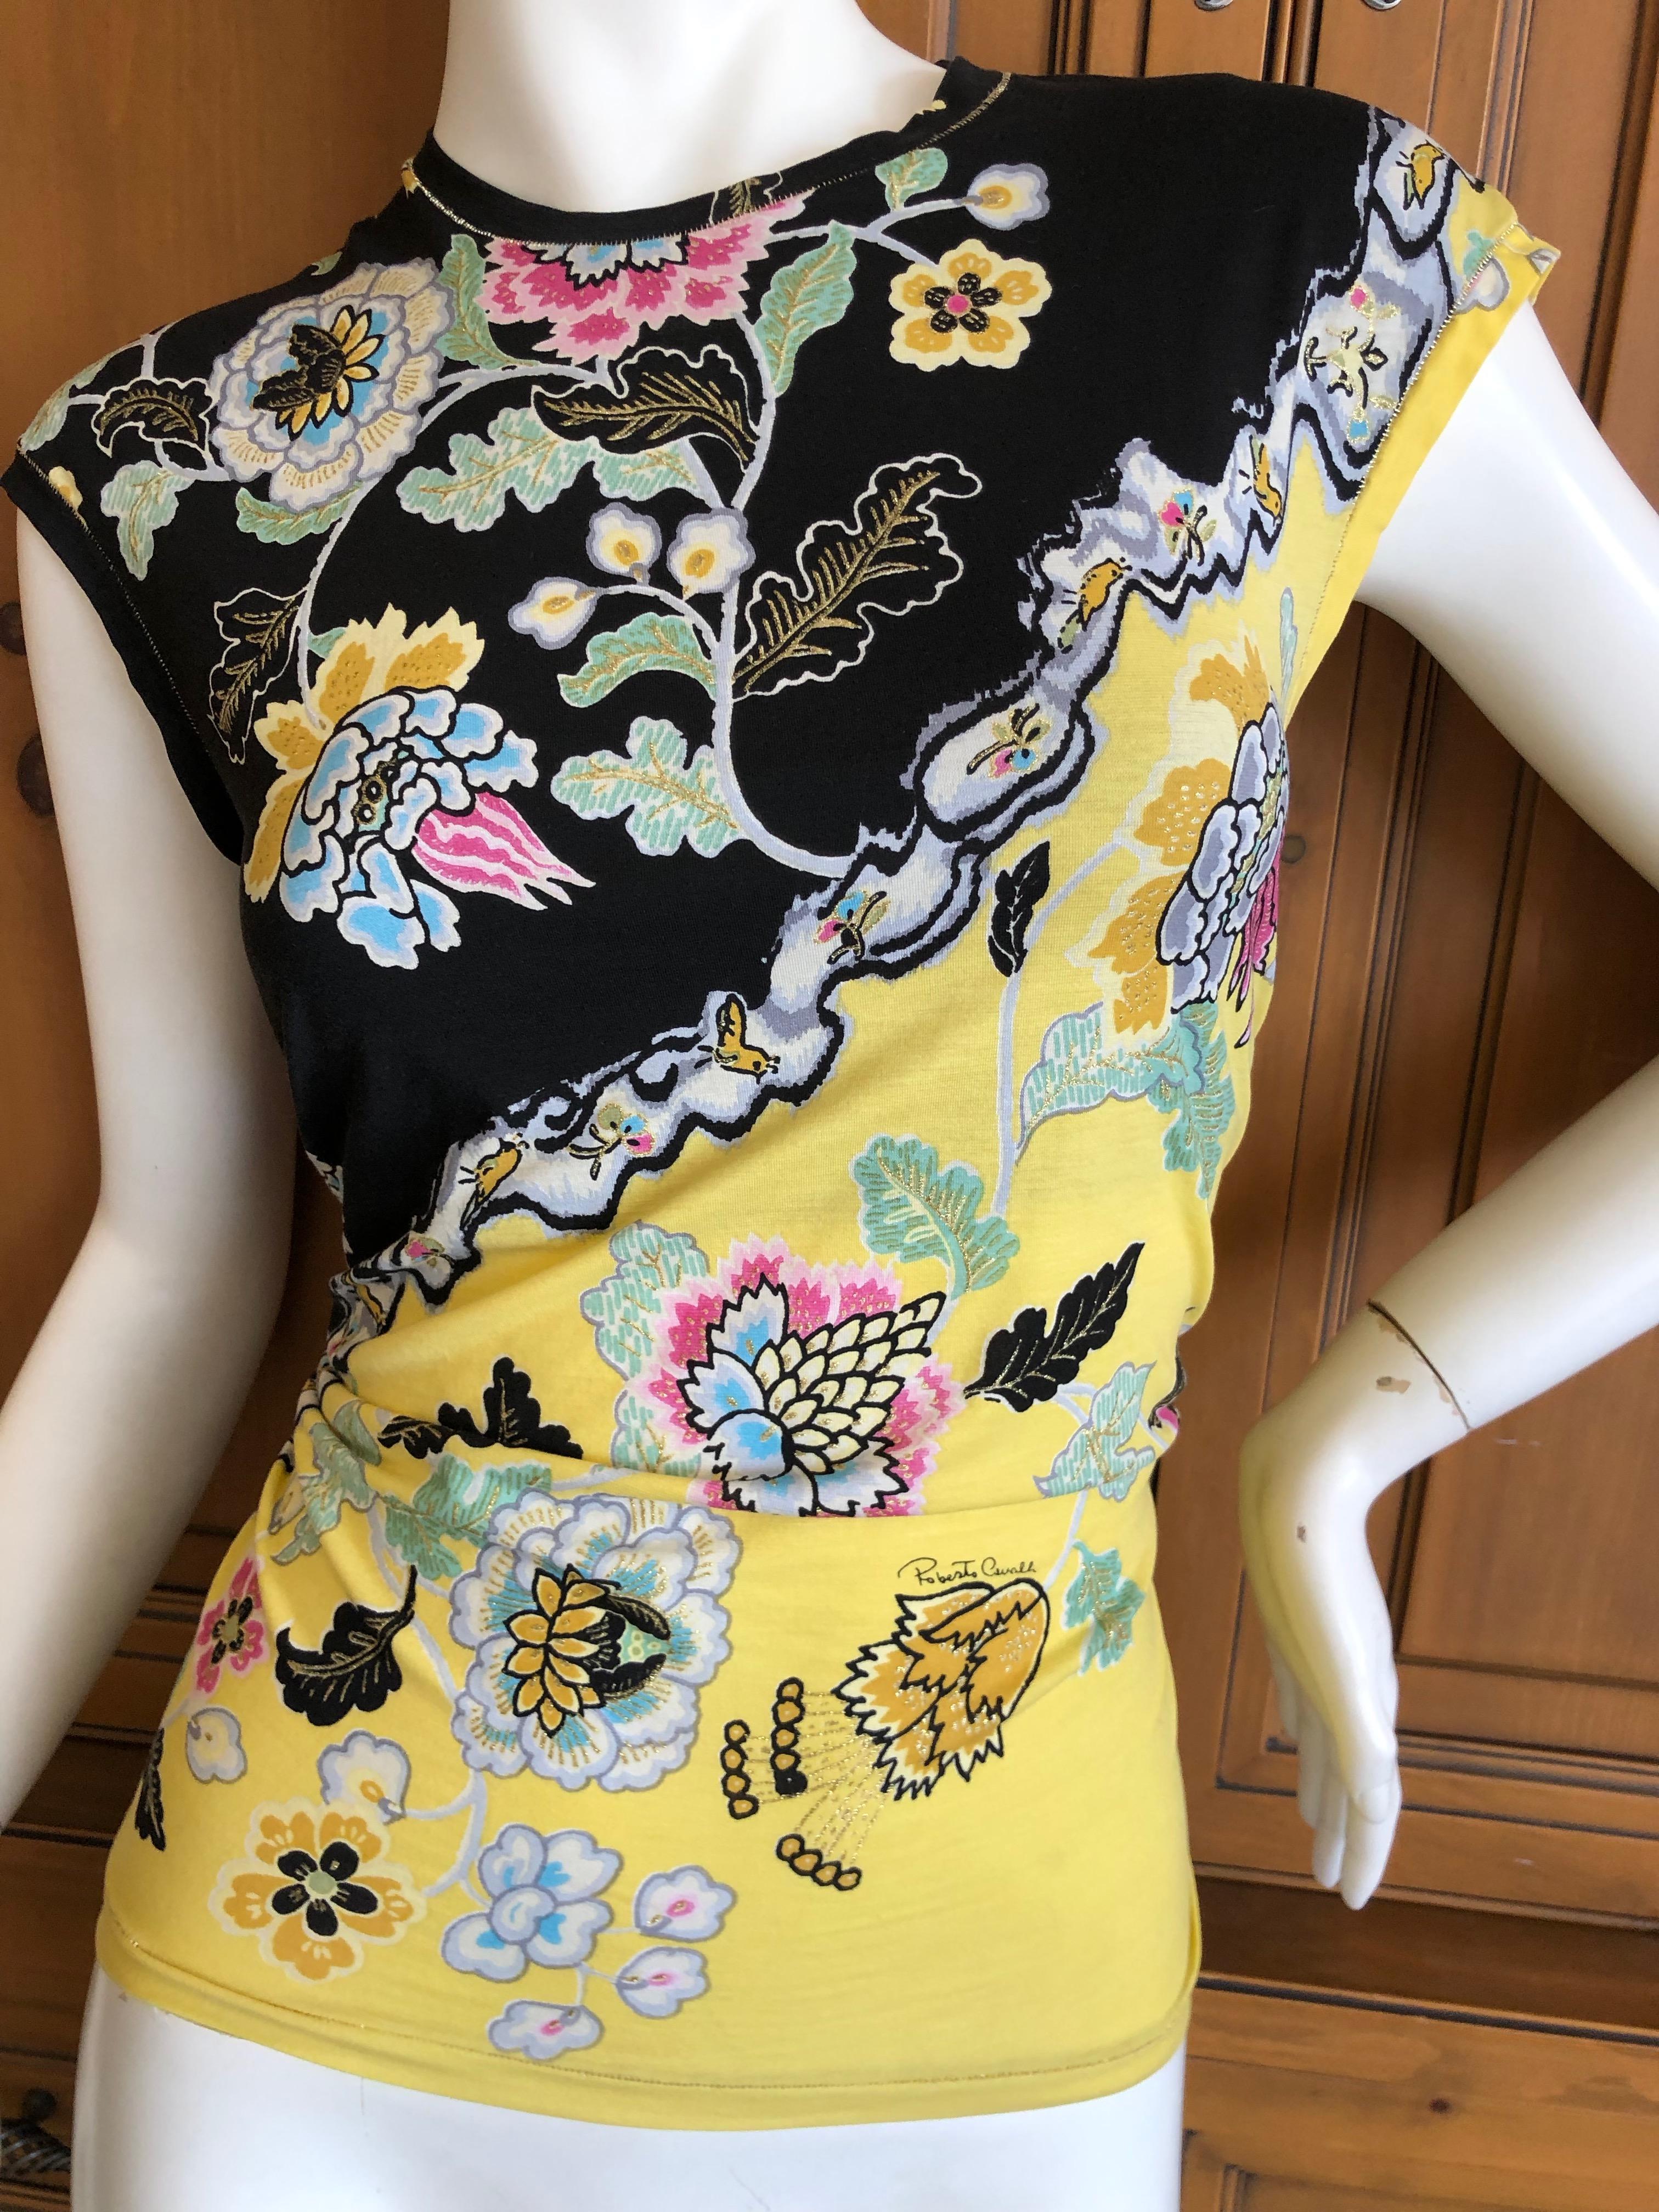 Roberto Cavalli Spring 2003 Silk Chinoiserie Style Floral Top 
Size S, there is a lot of stretch
Bust 34